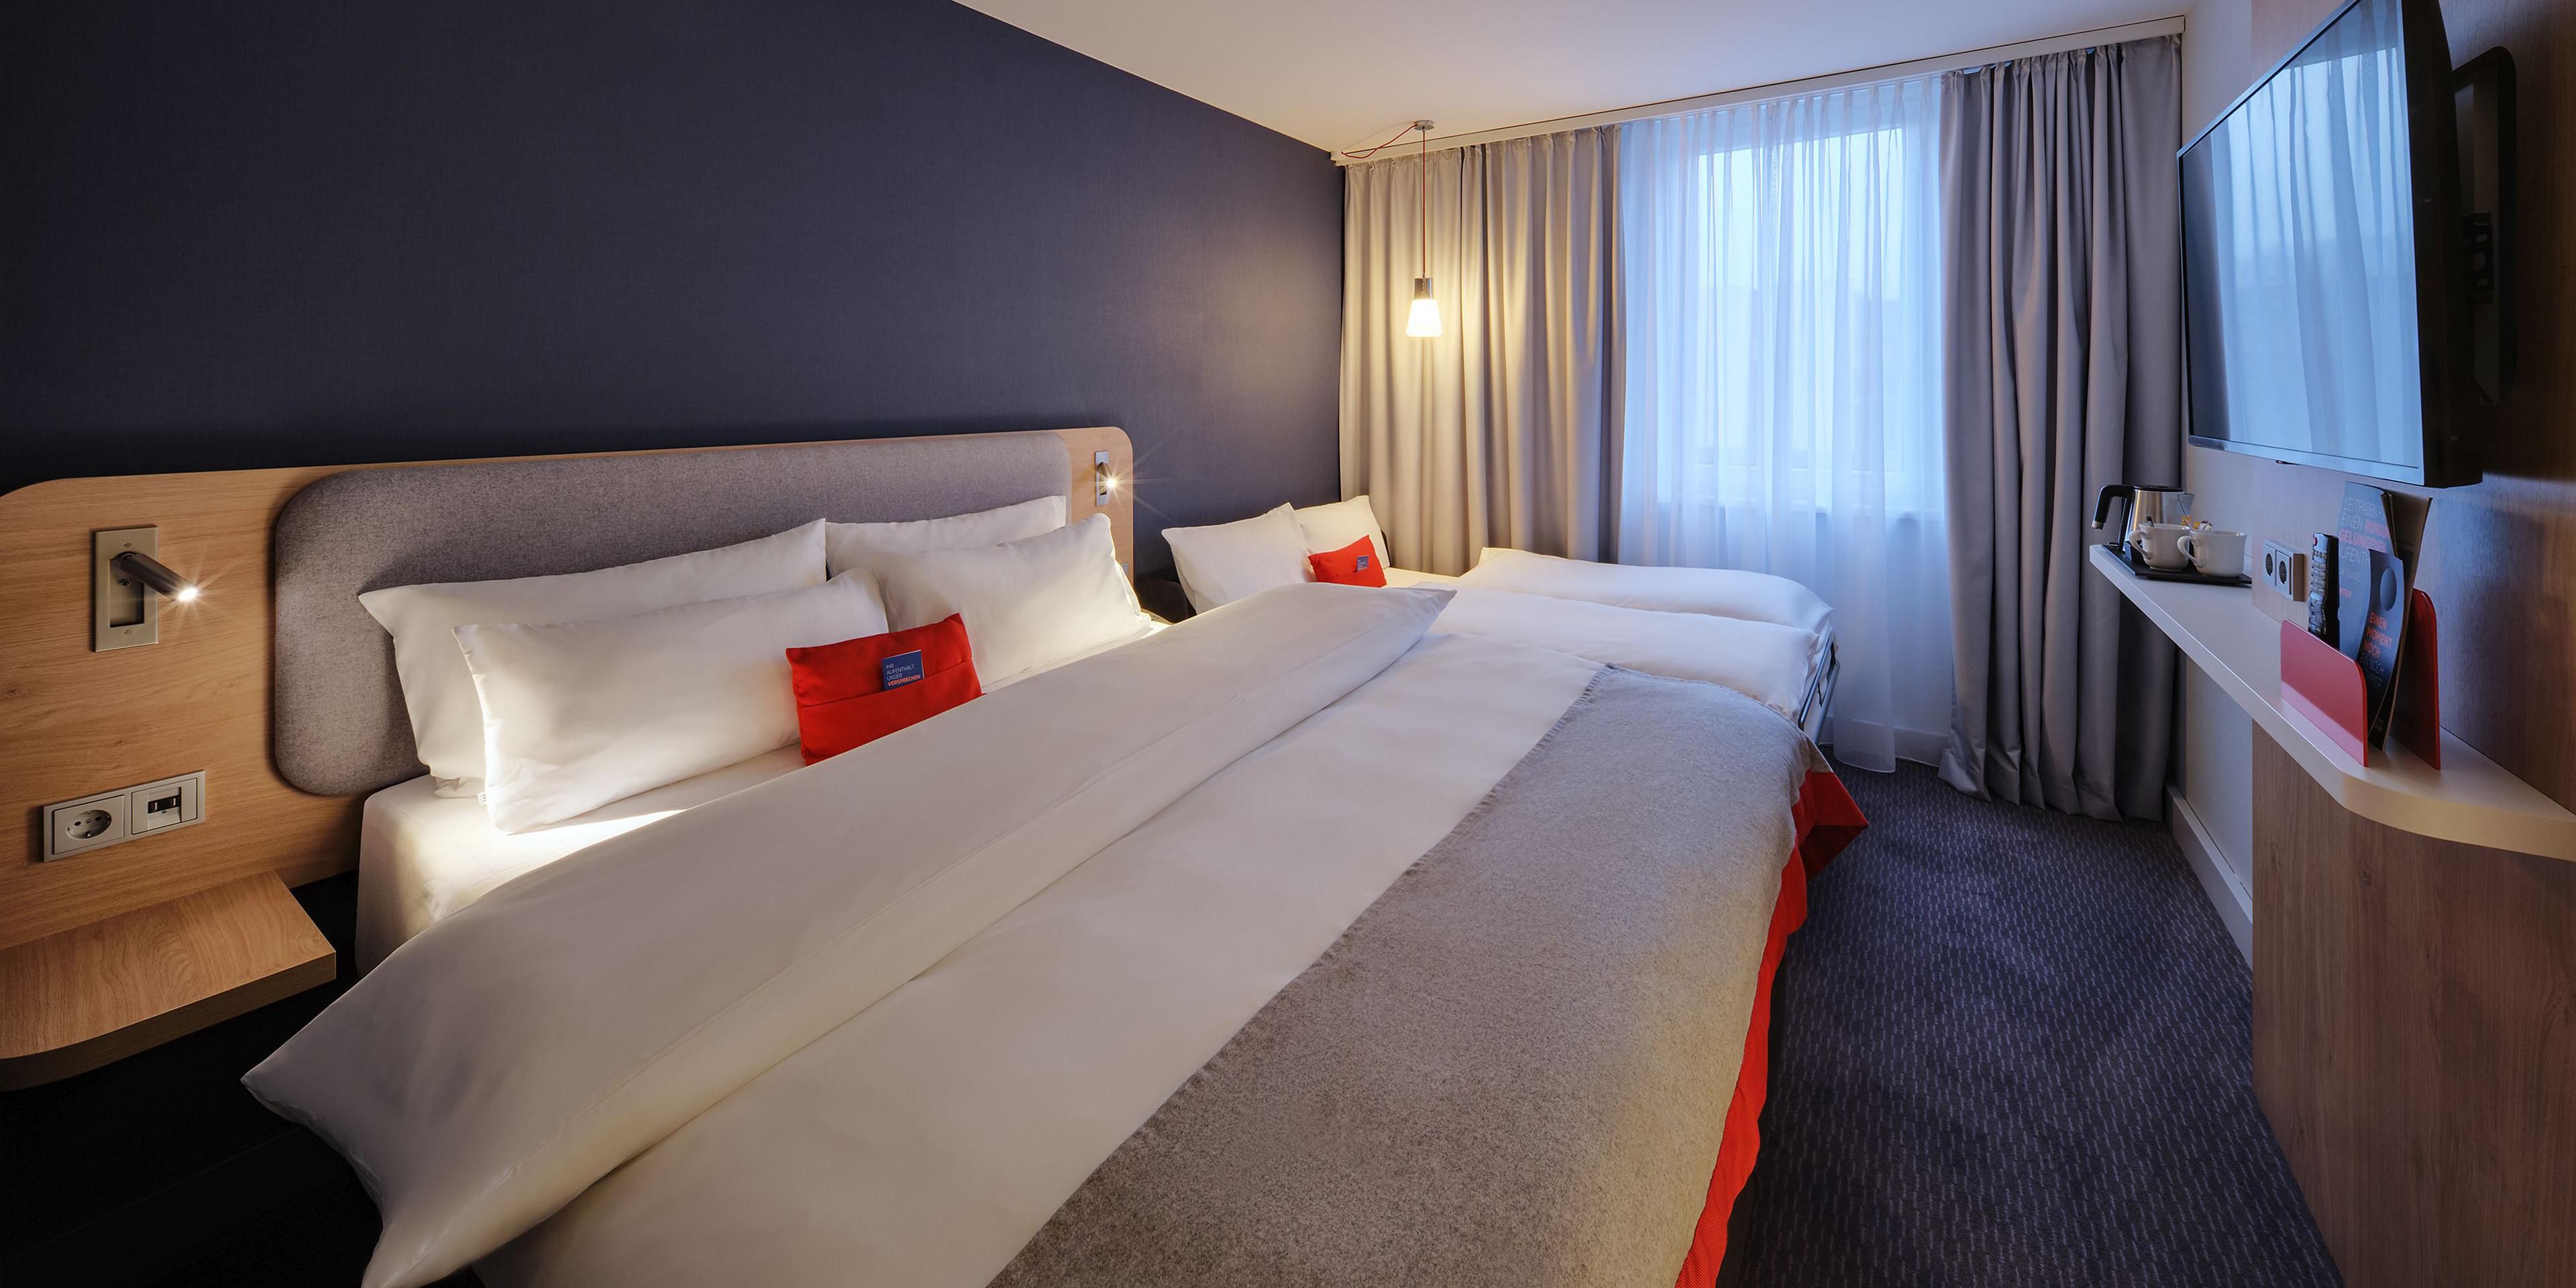 Drift off to sleep in our restful next-generation guest rooms with blackout curtains and comfortable beds. They're decorated in calm shades enlivened by pops of colour and all have Flatscreen TVs, bedside USB ports, and inclusive WiFi. If you're travelling with kids, all our family rooms have sofa beds.